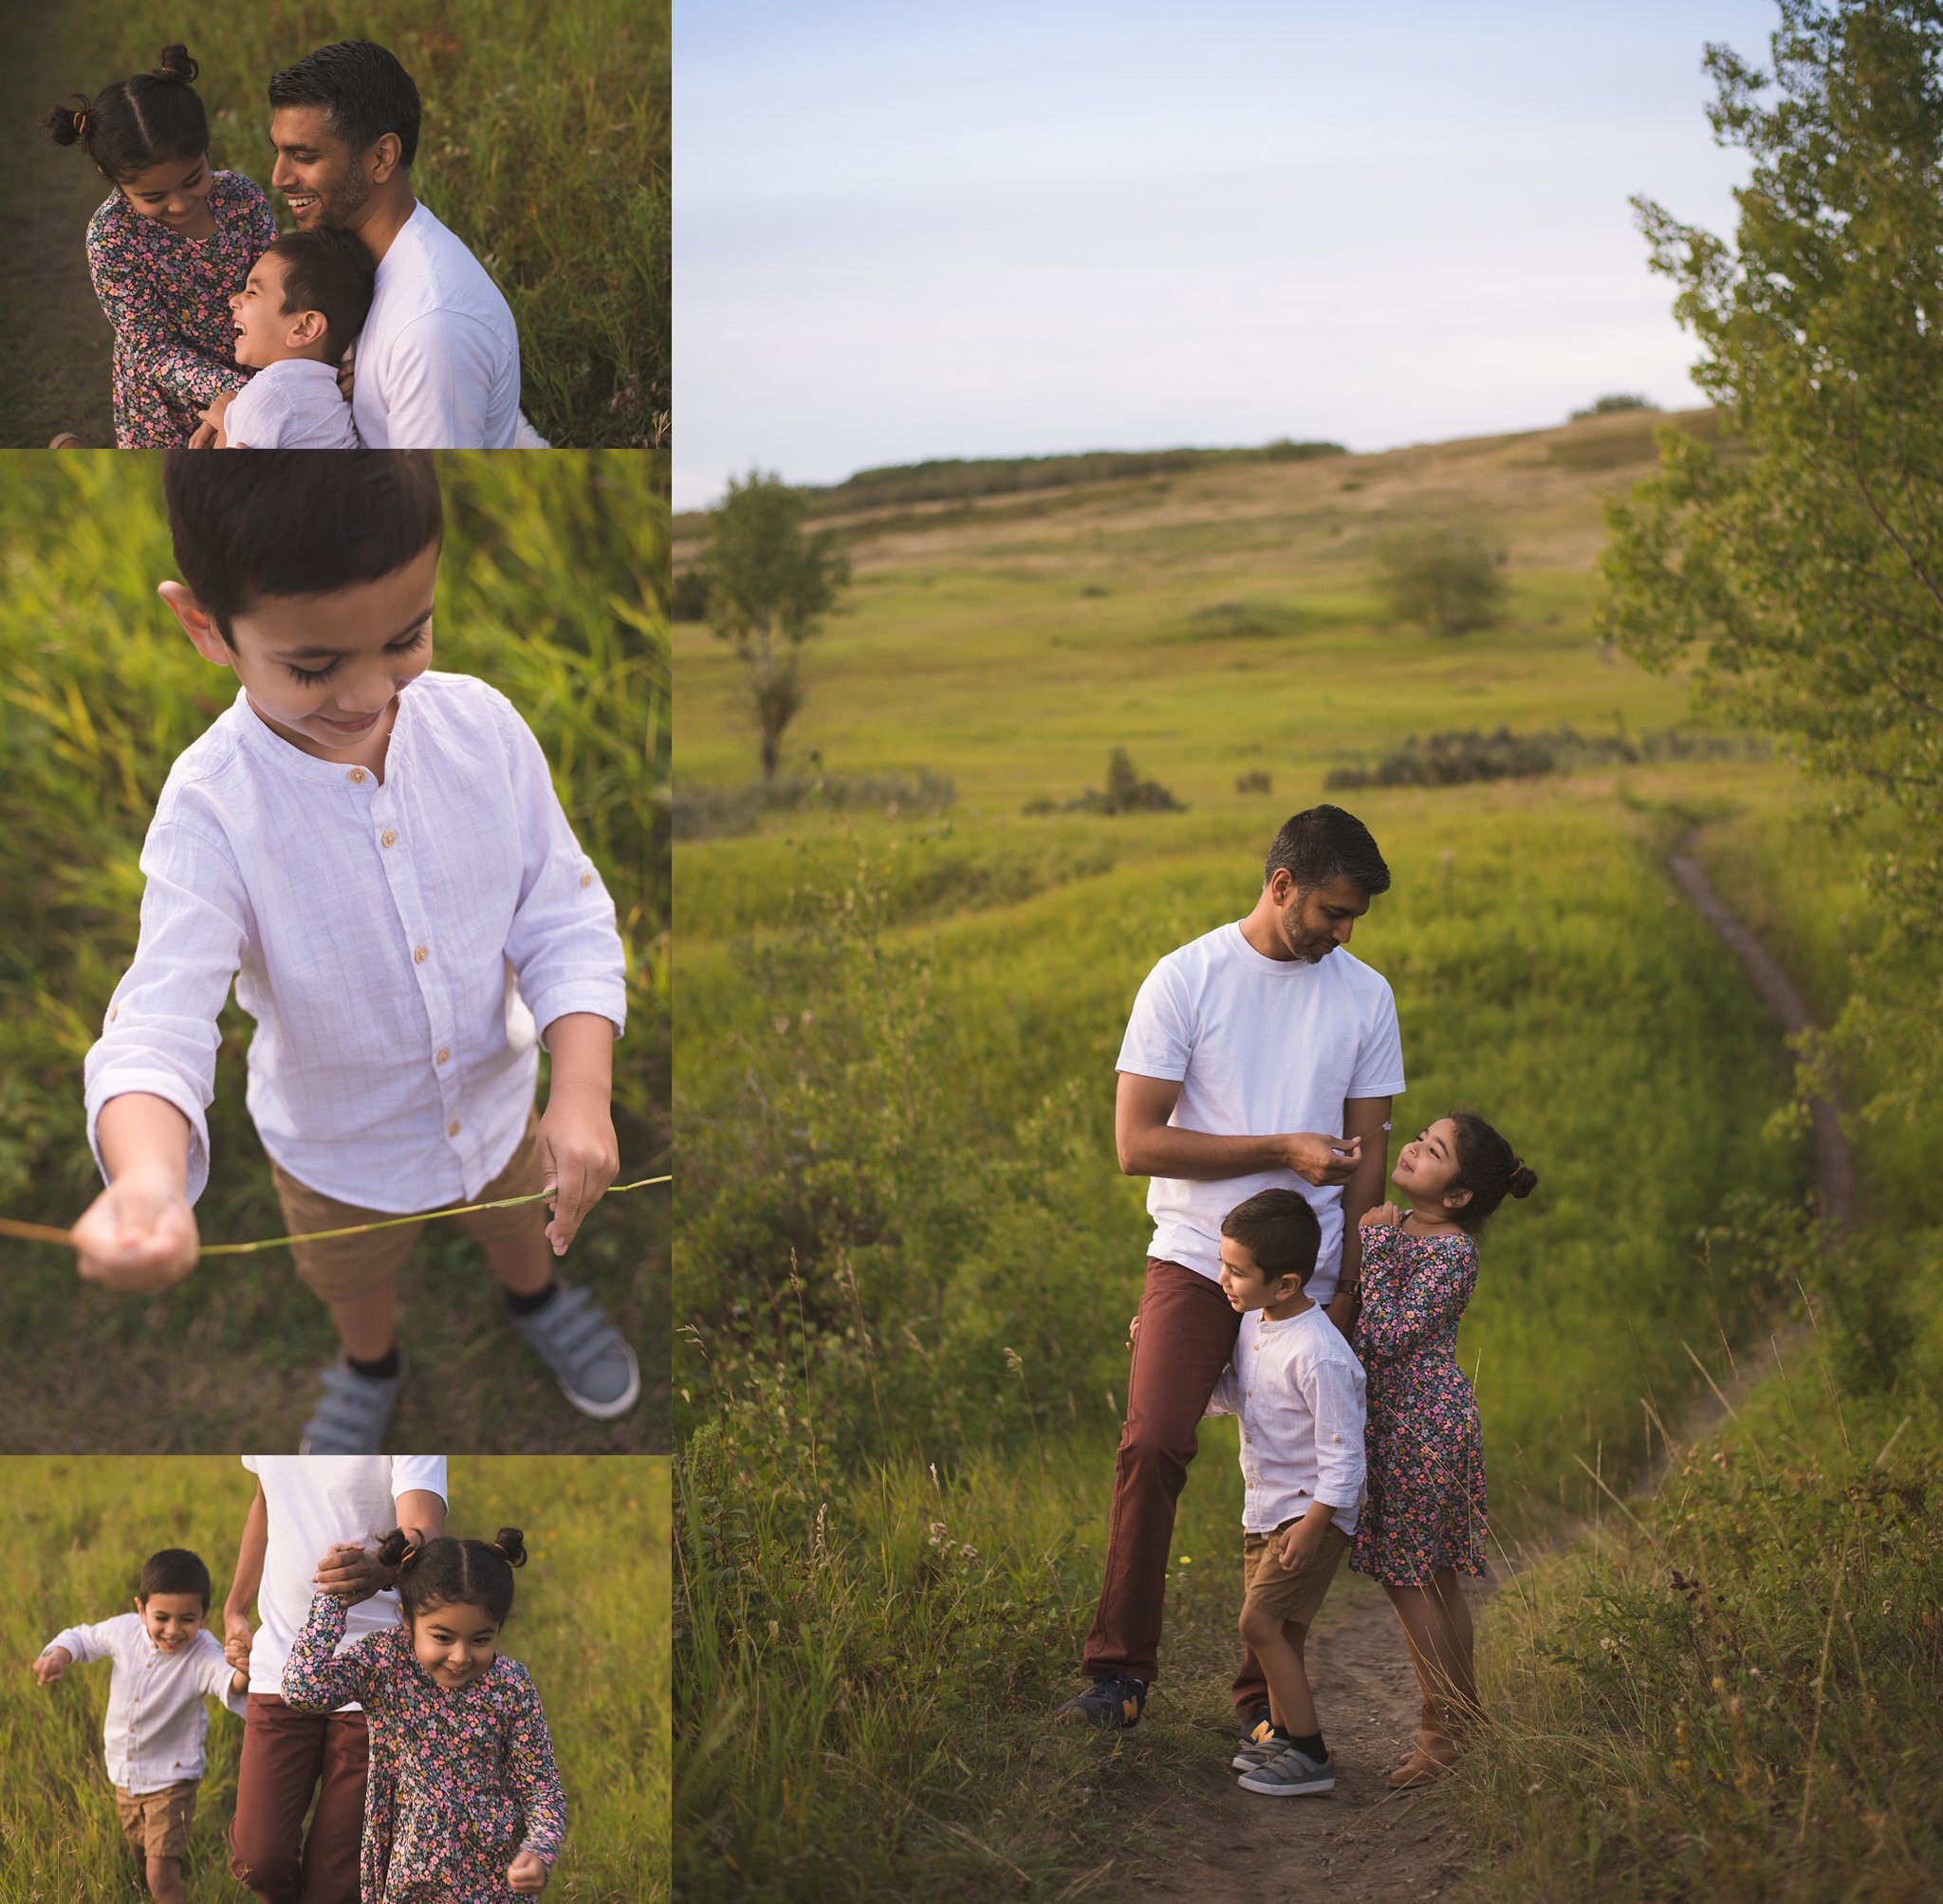 calgary airdrie family photography candid fun outdoor shoot